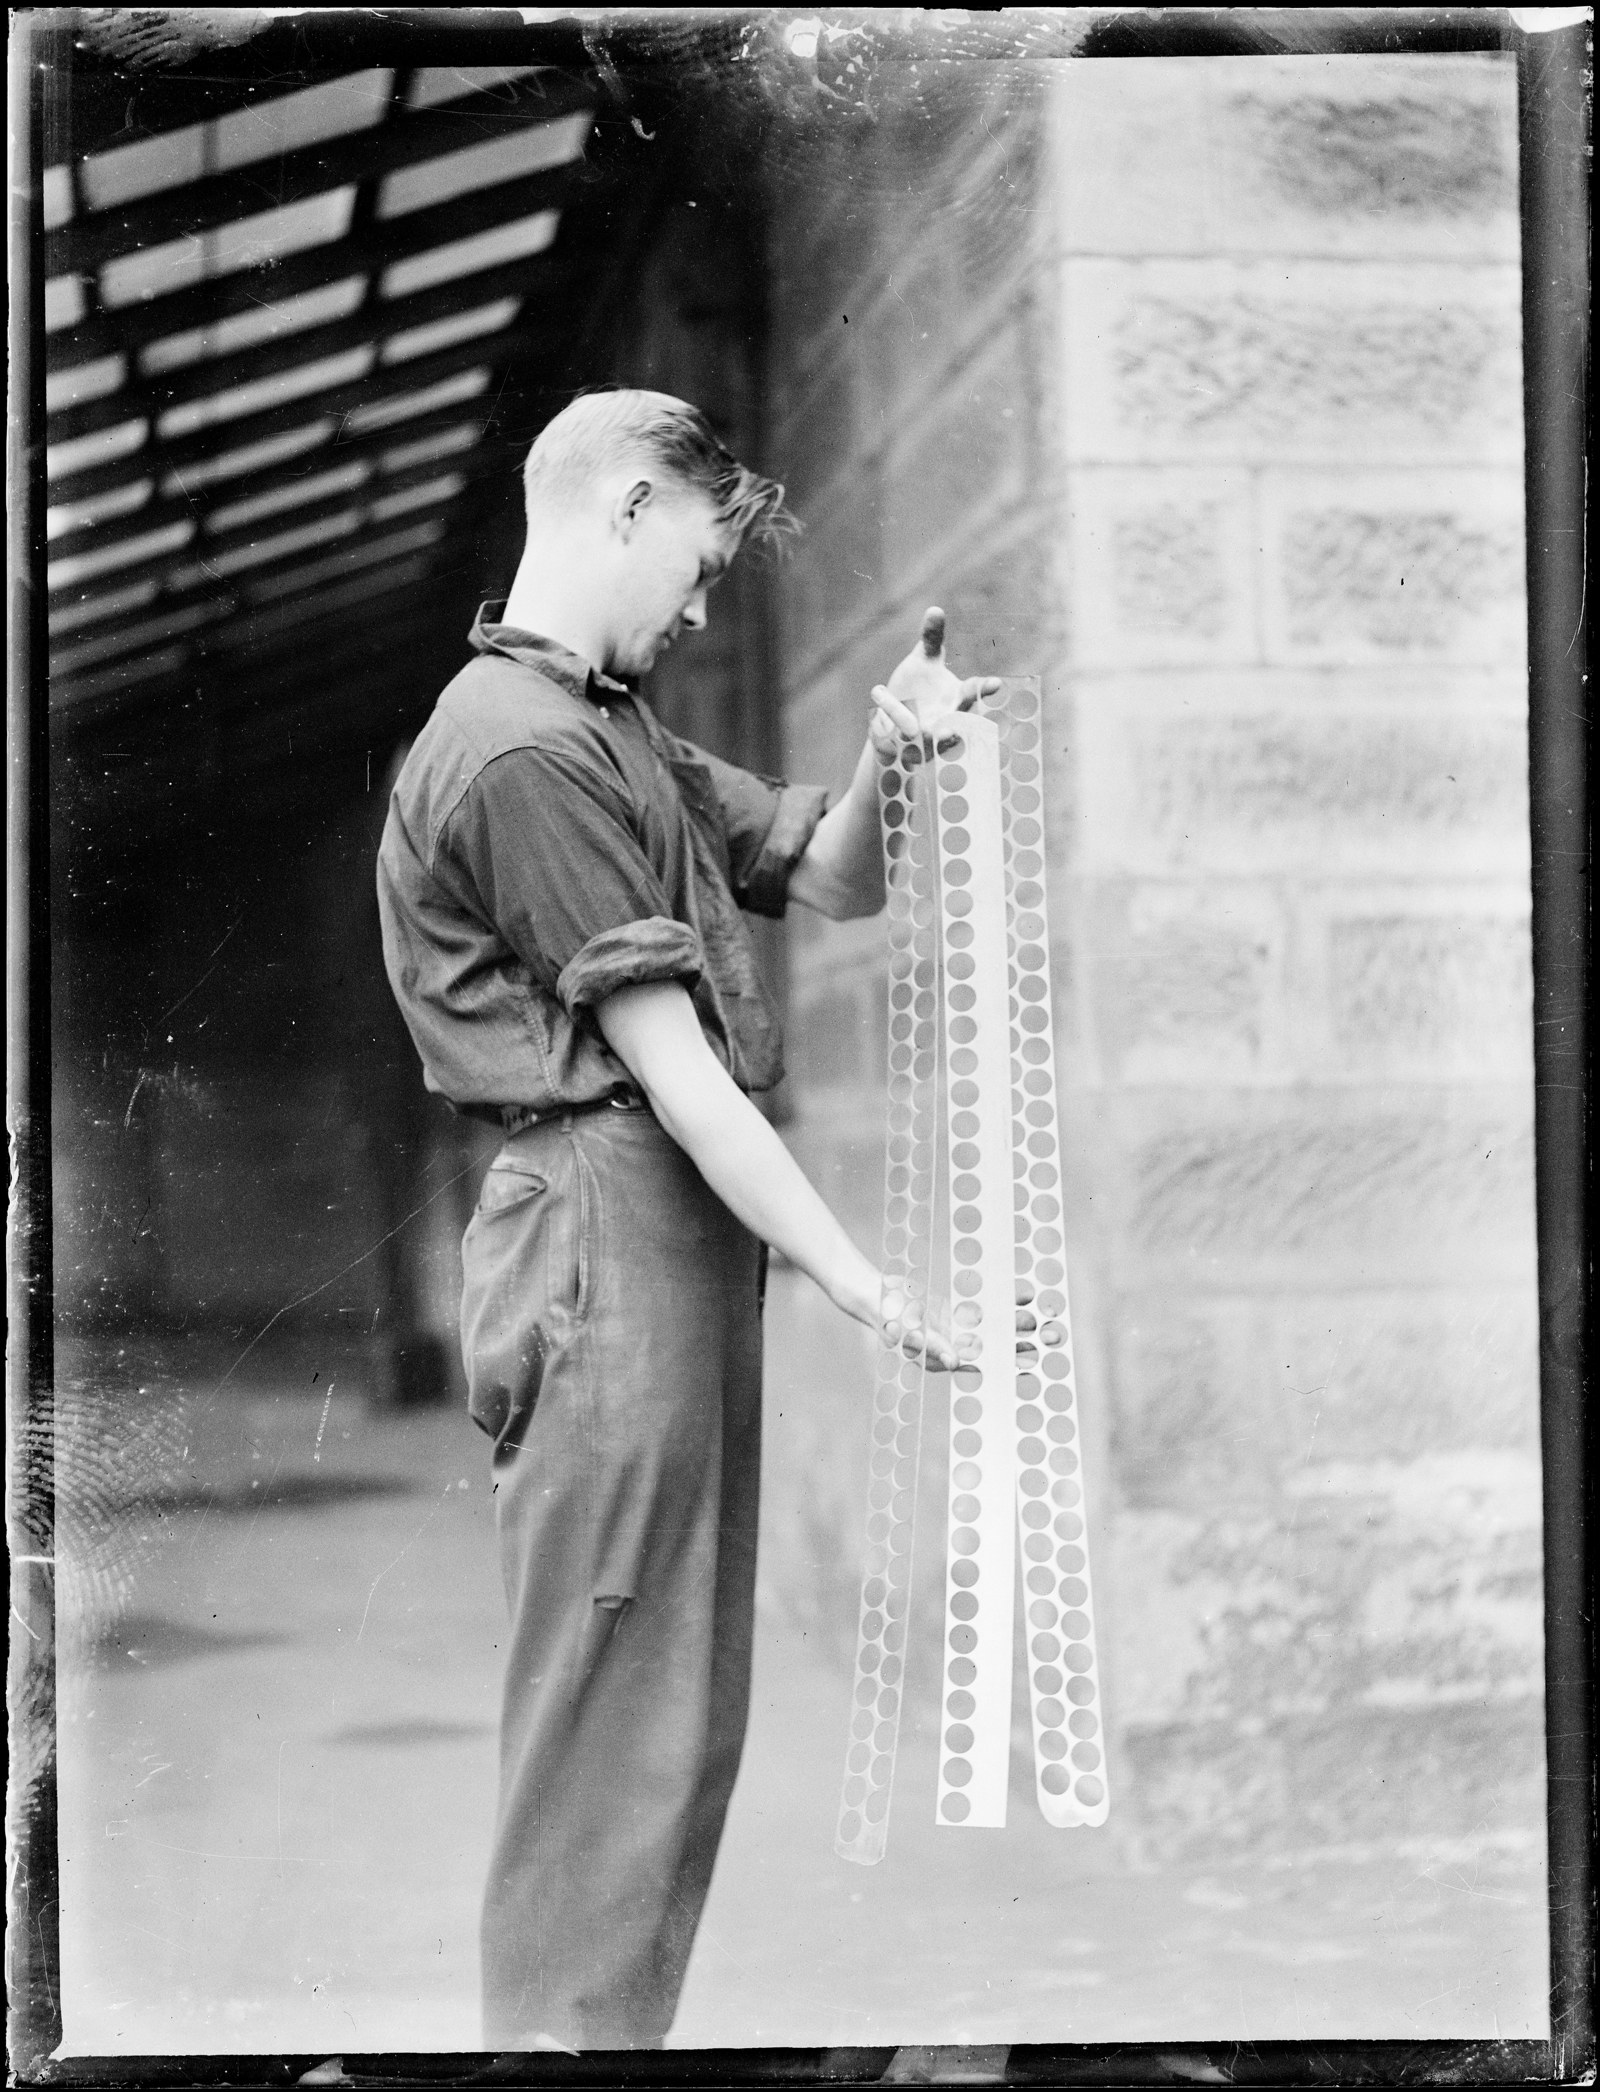 Black and white photo of a young man holding long silver moulds used for casting coins